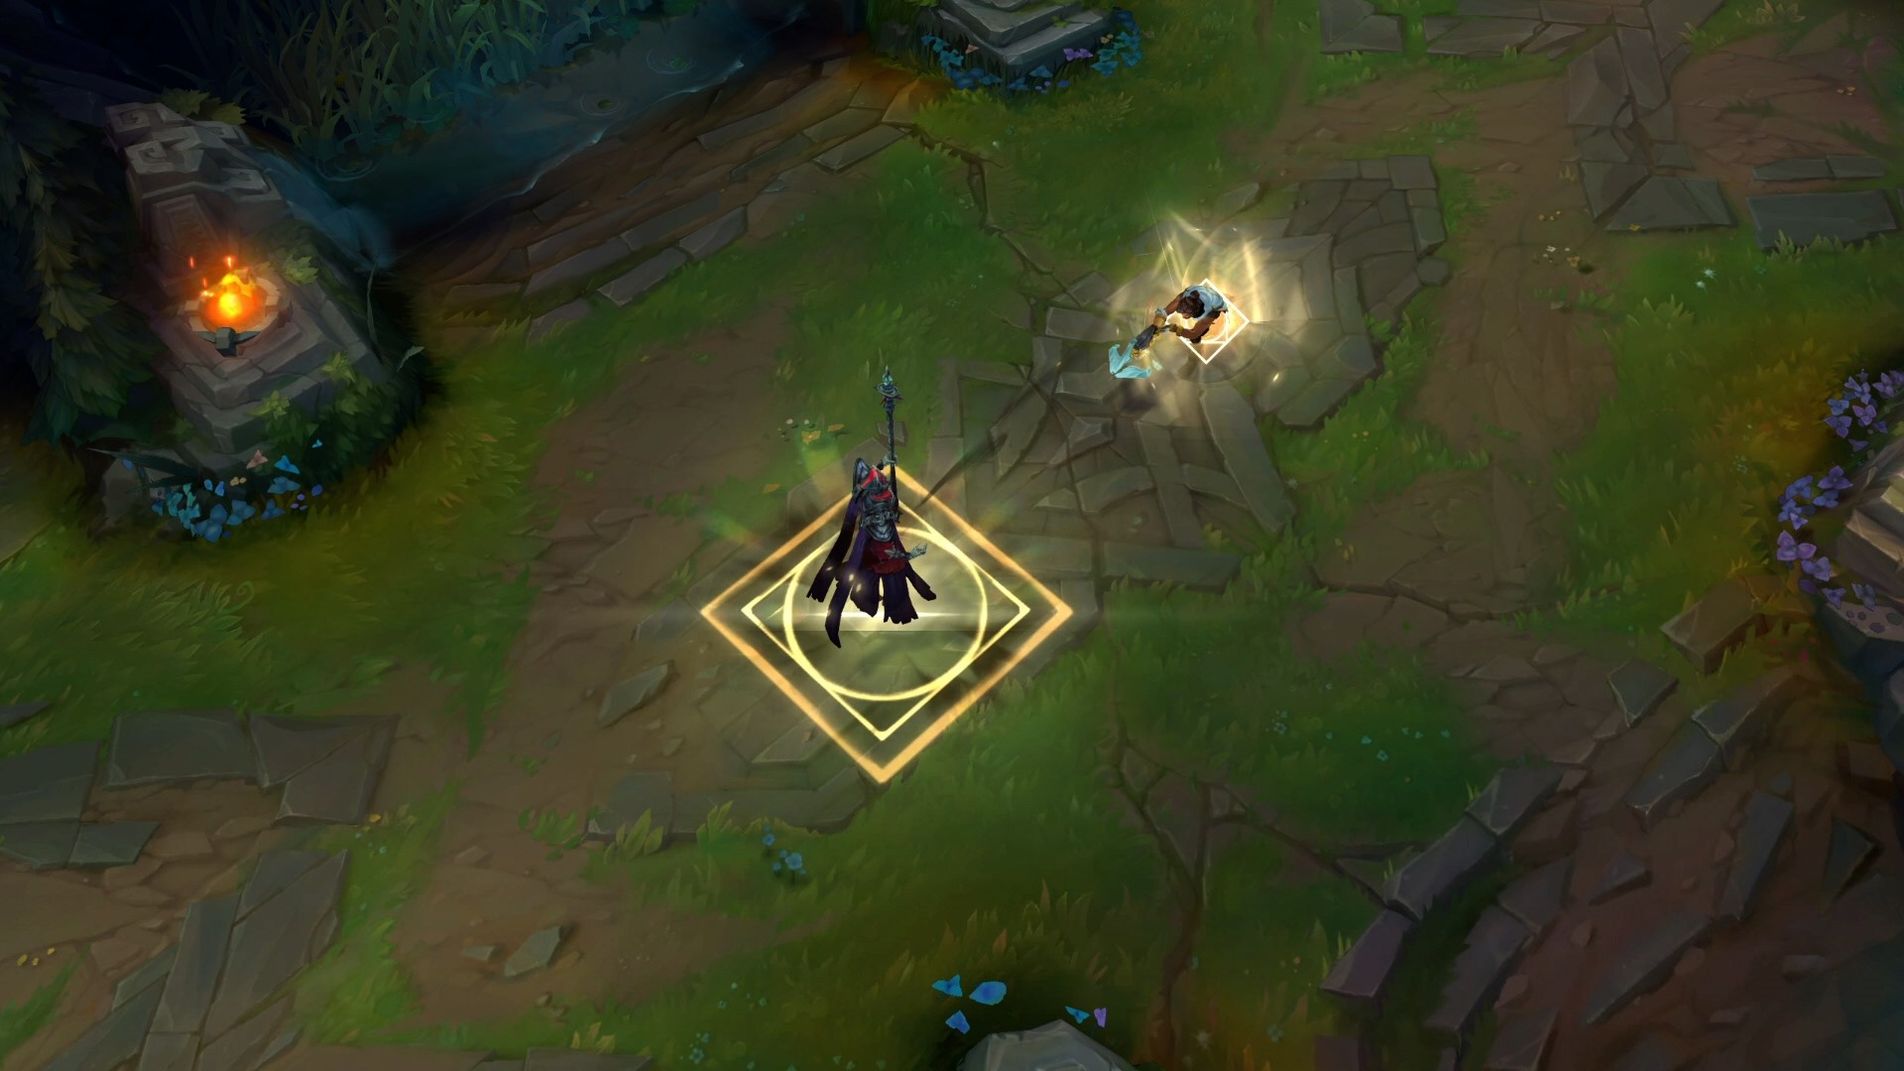 Marking enemy champion Karthus with Akshan's Passive ability on the Rift